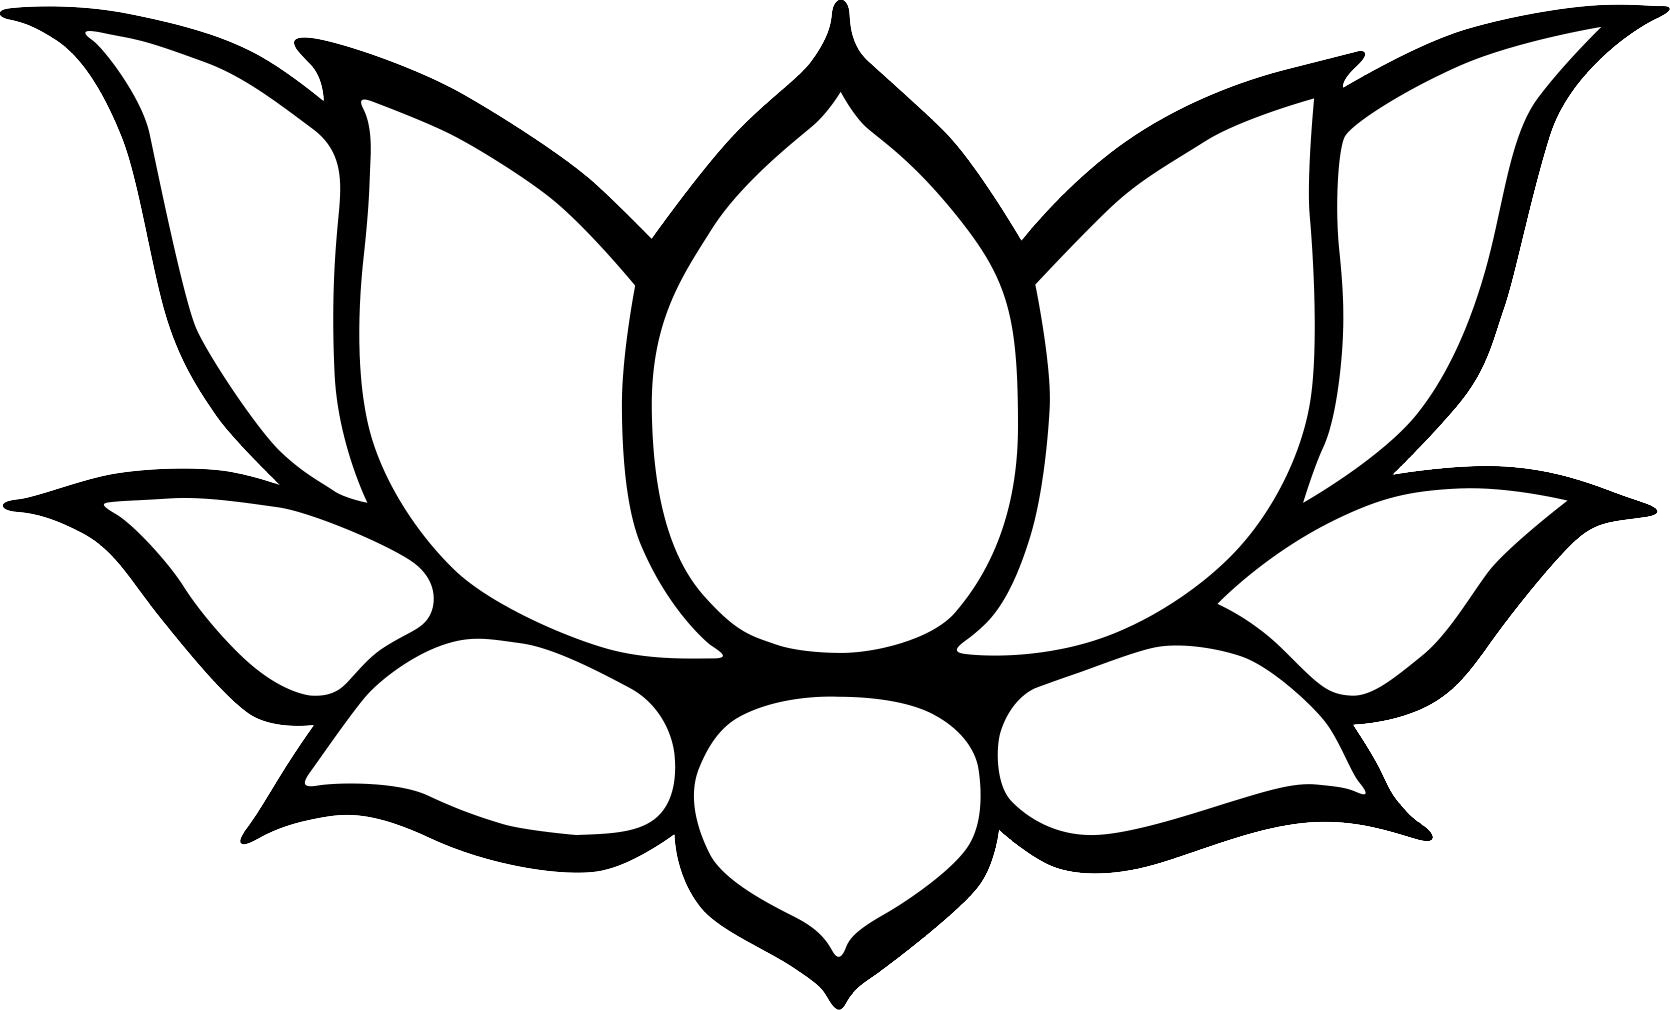 Black and White Lotus Logo - Picture royalty free download lotus flower - RR collections